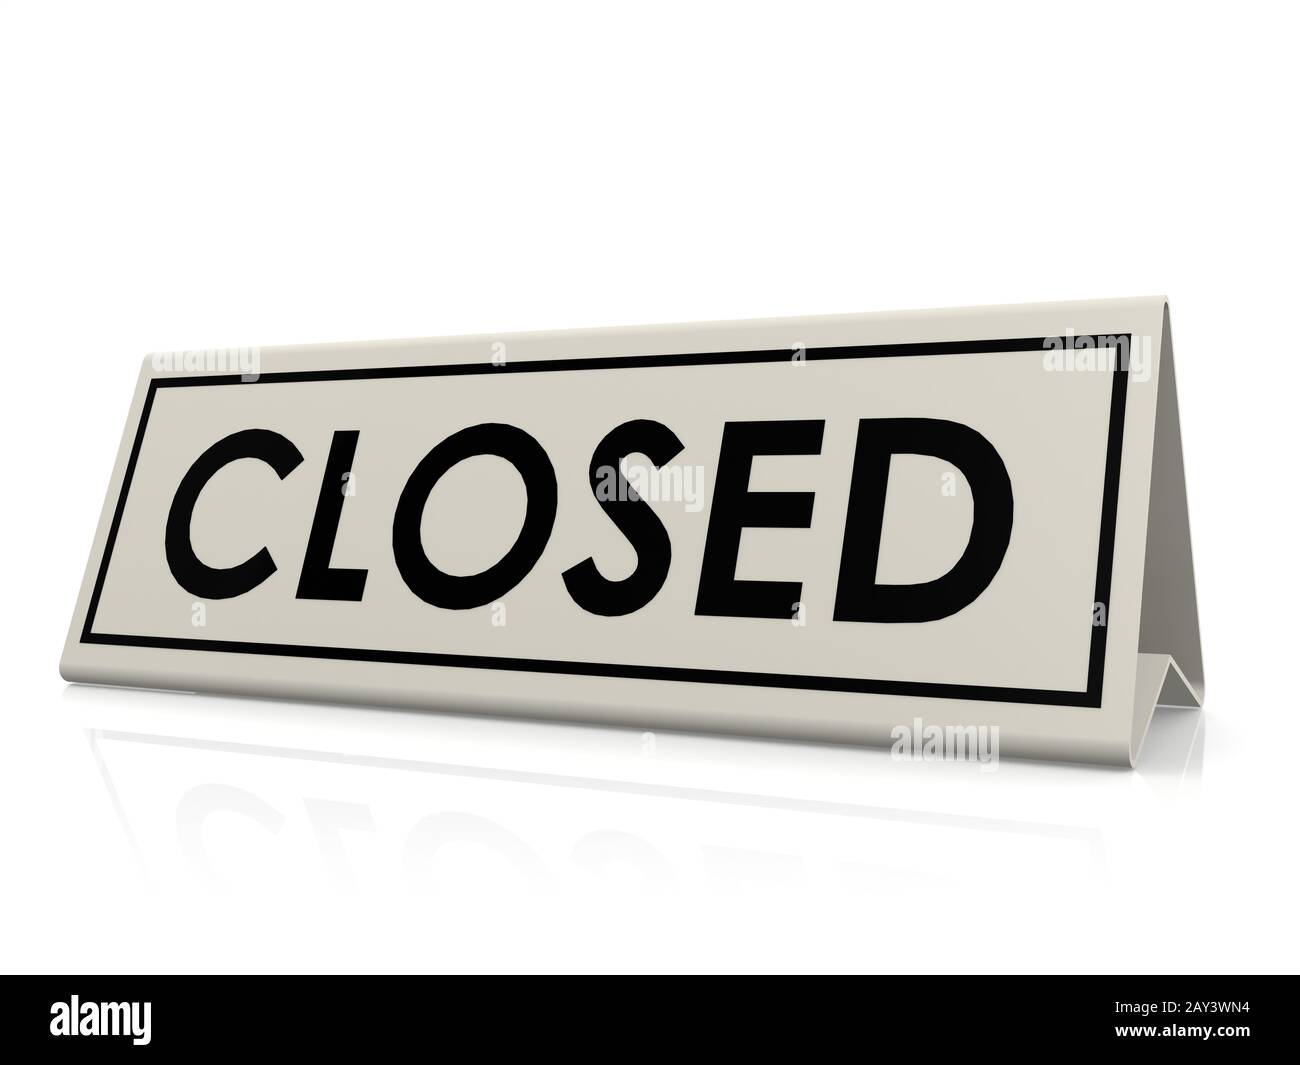 Closed table sign Stock Photo